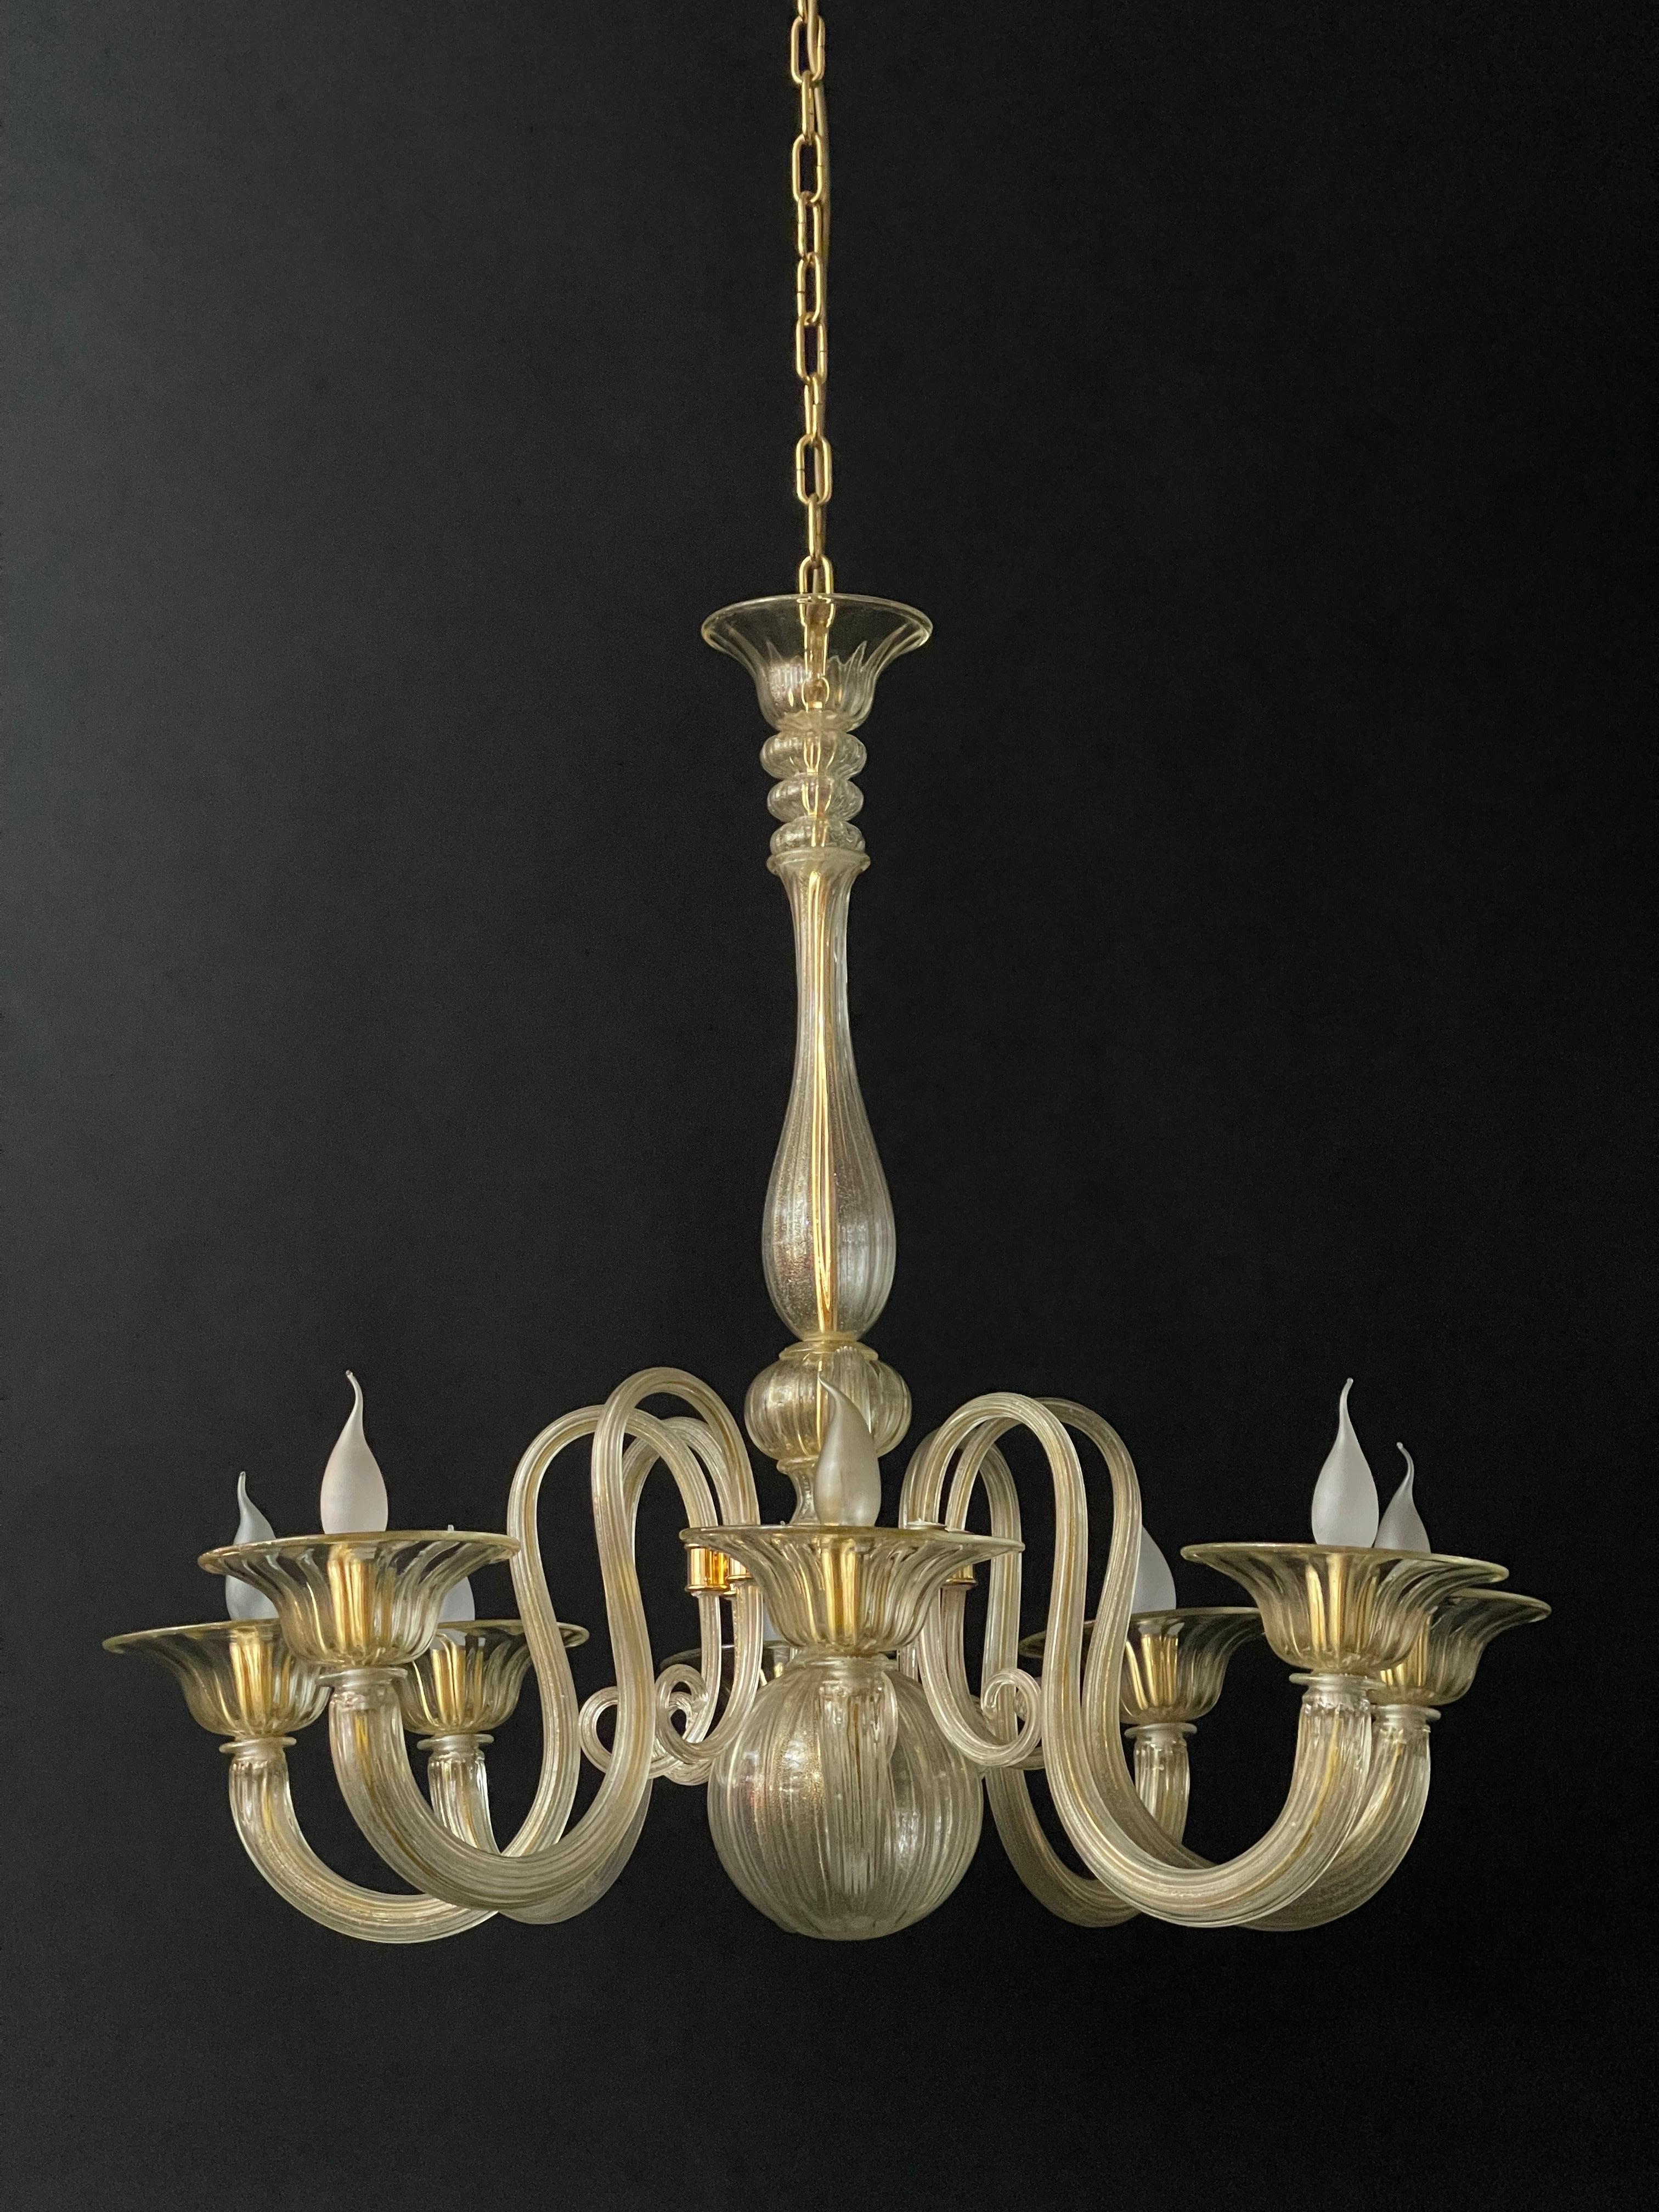 Italian Large Barovier Toso Gold Dusted Murano Glass Chandelier, circa 1960s For Sale